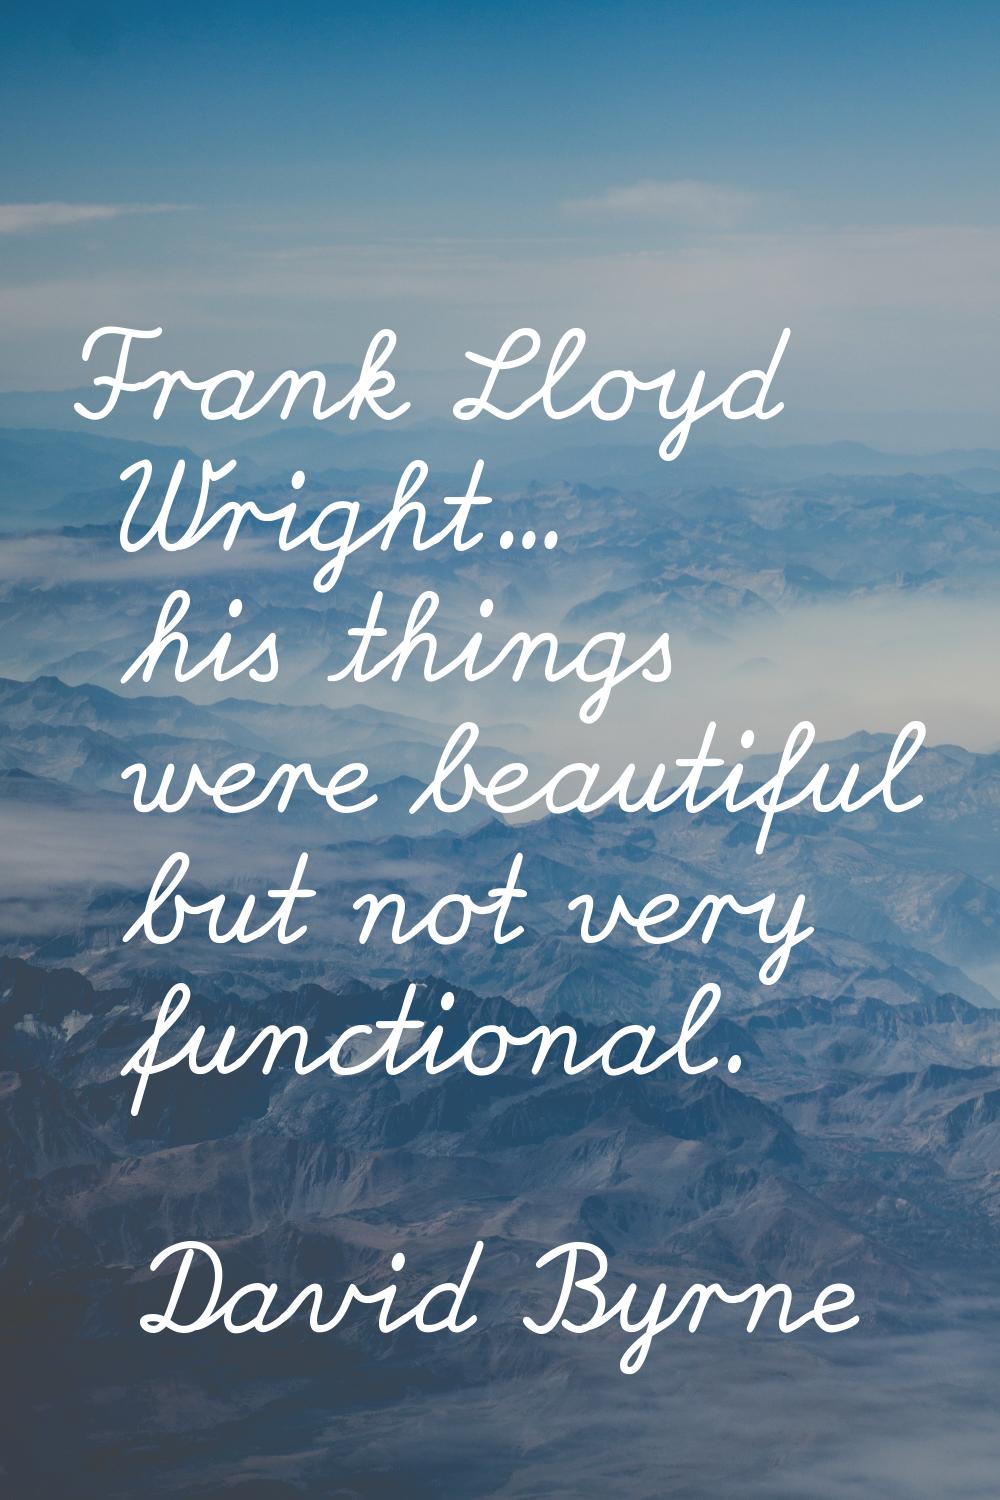 Frank Lloyd Wright... his things were beautiful but not very functional.